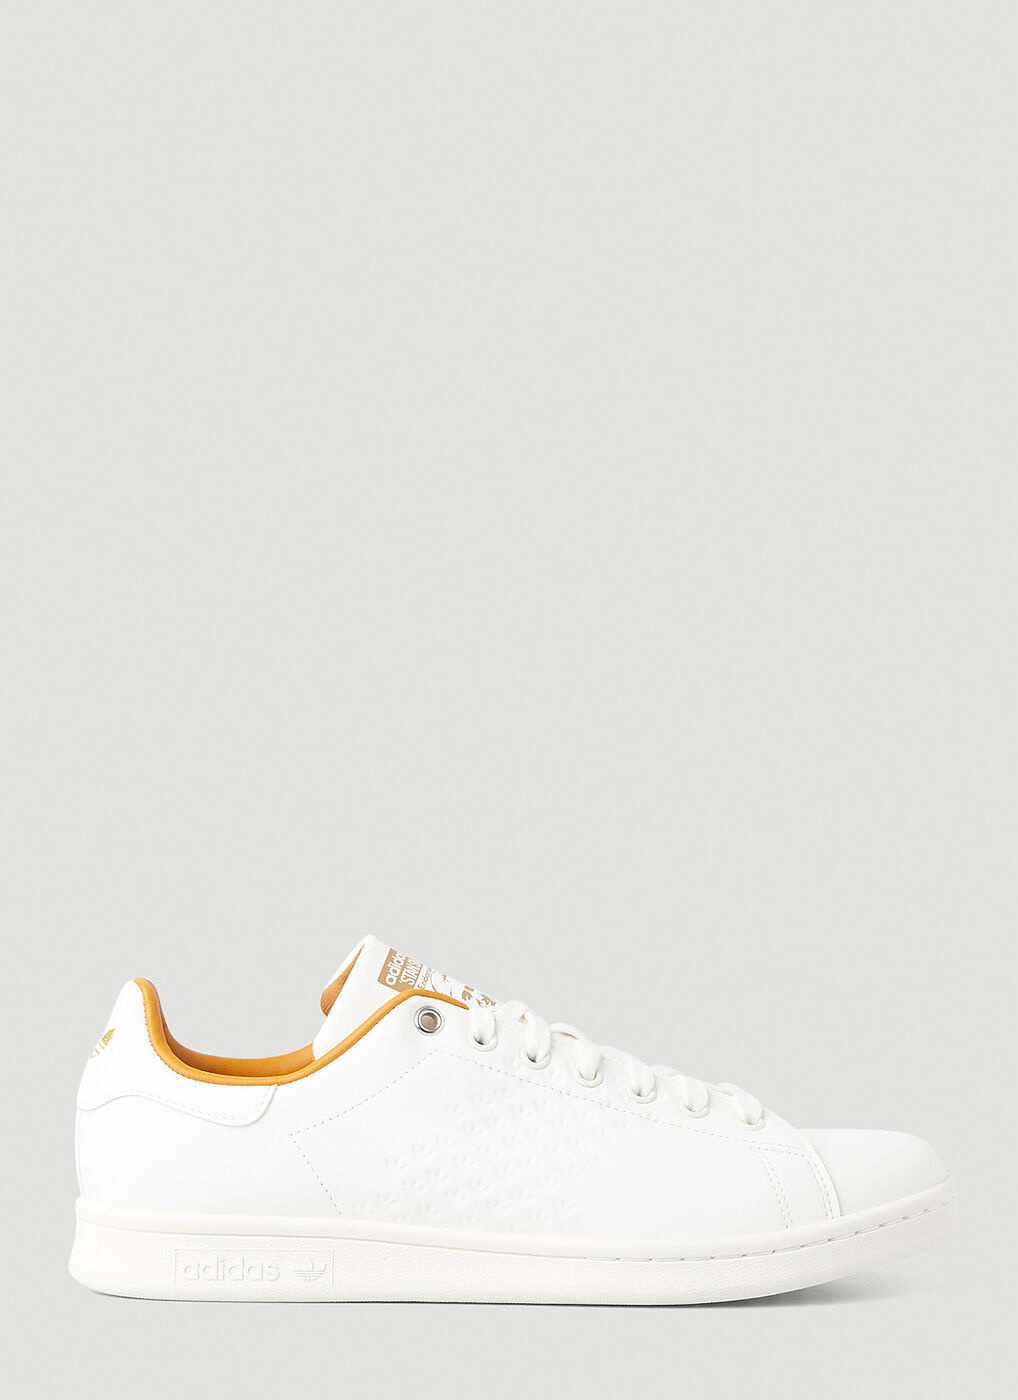 Winter Olympics Smith Sneakers in White